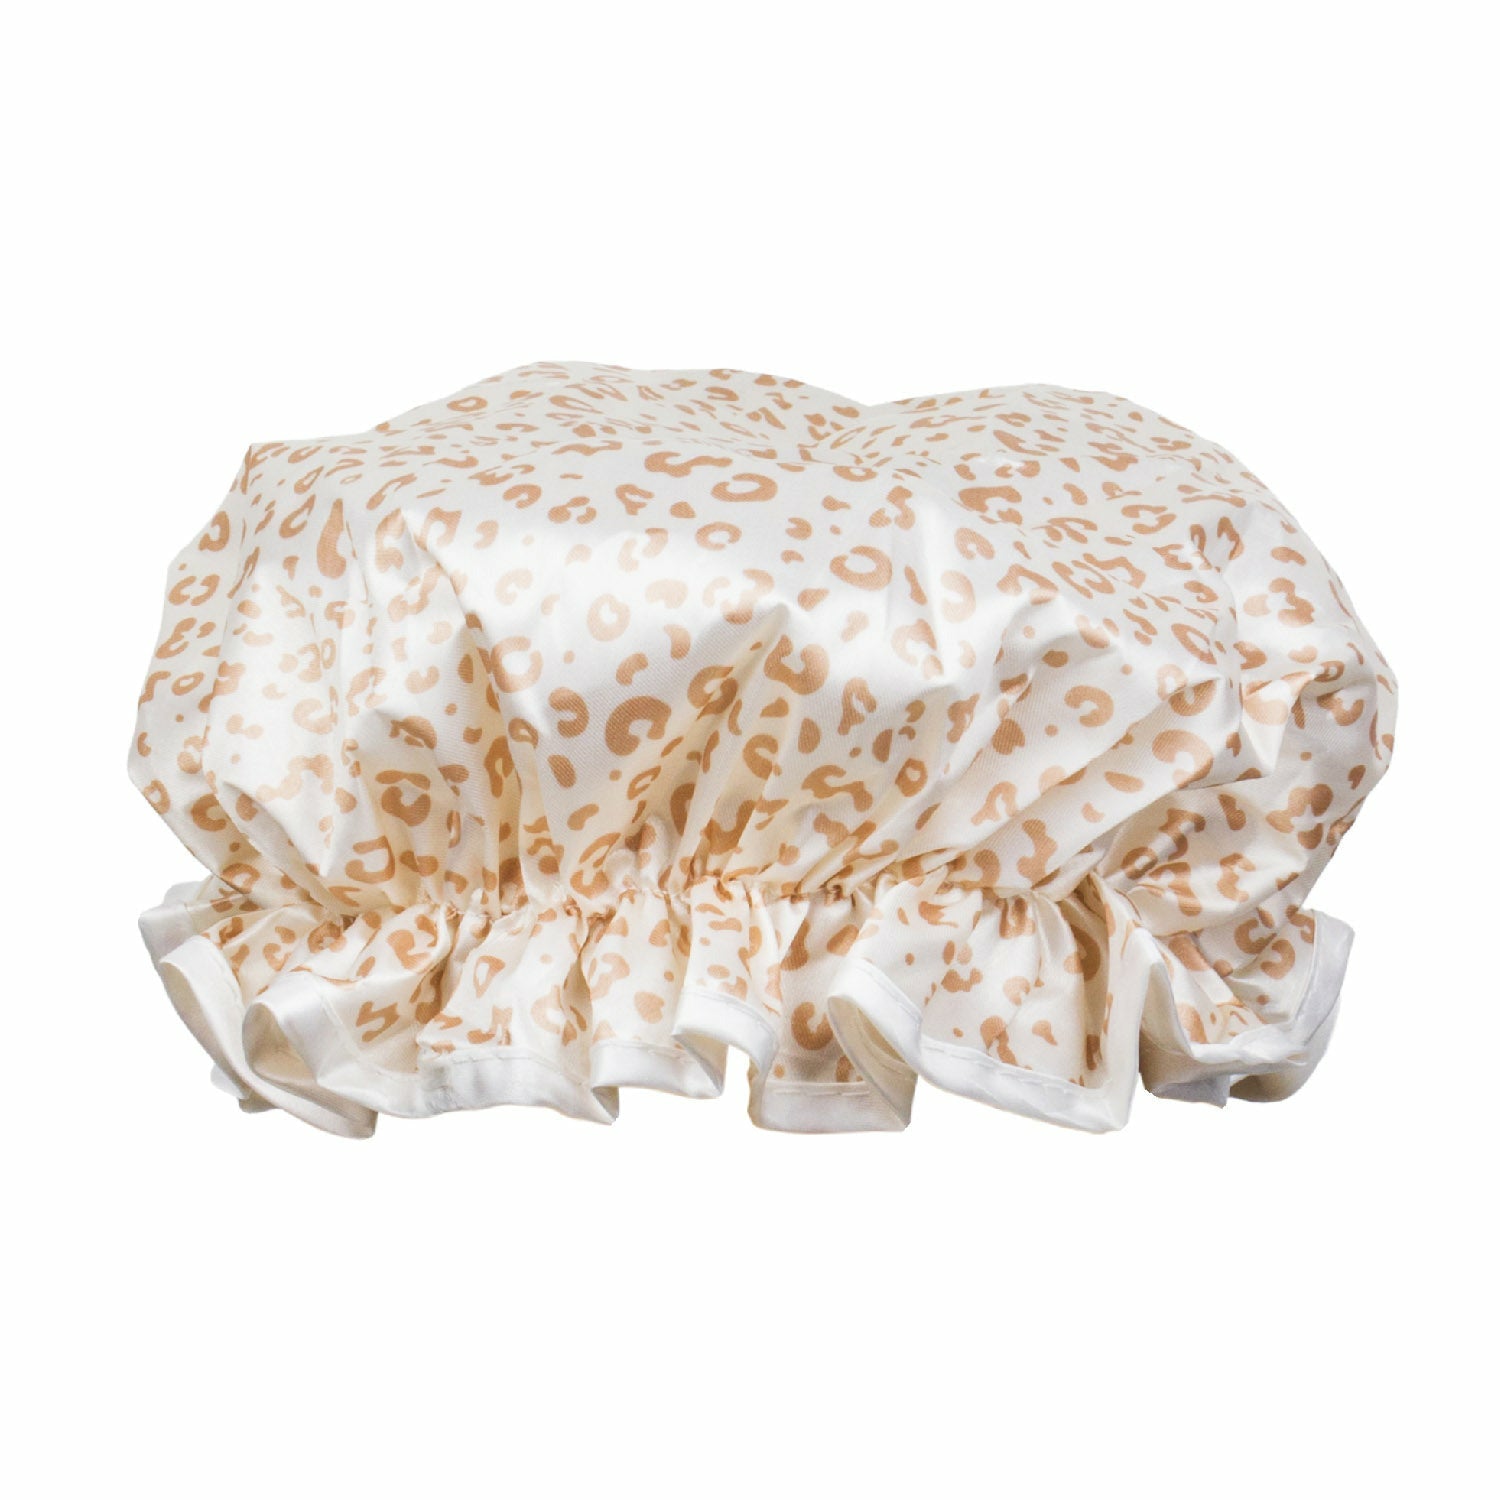 Our Leopard & Rose shower bonnets are now available on . It